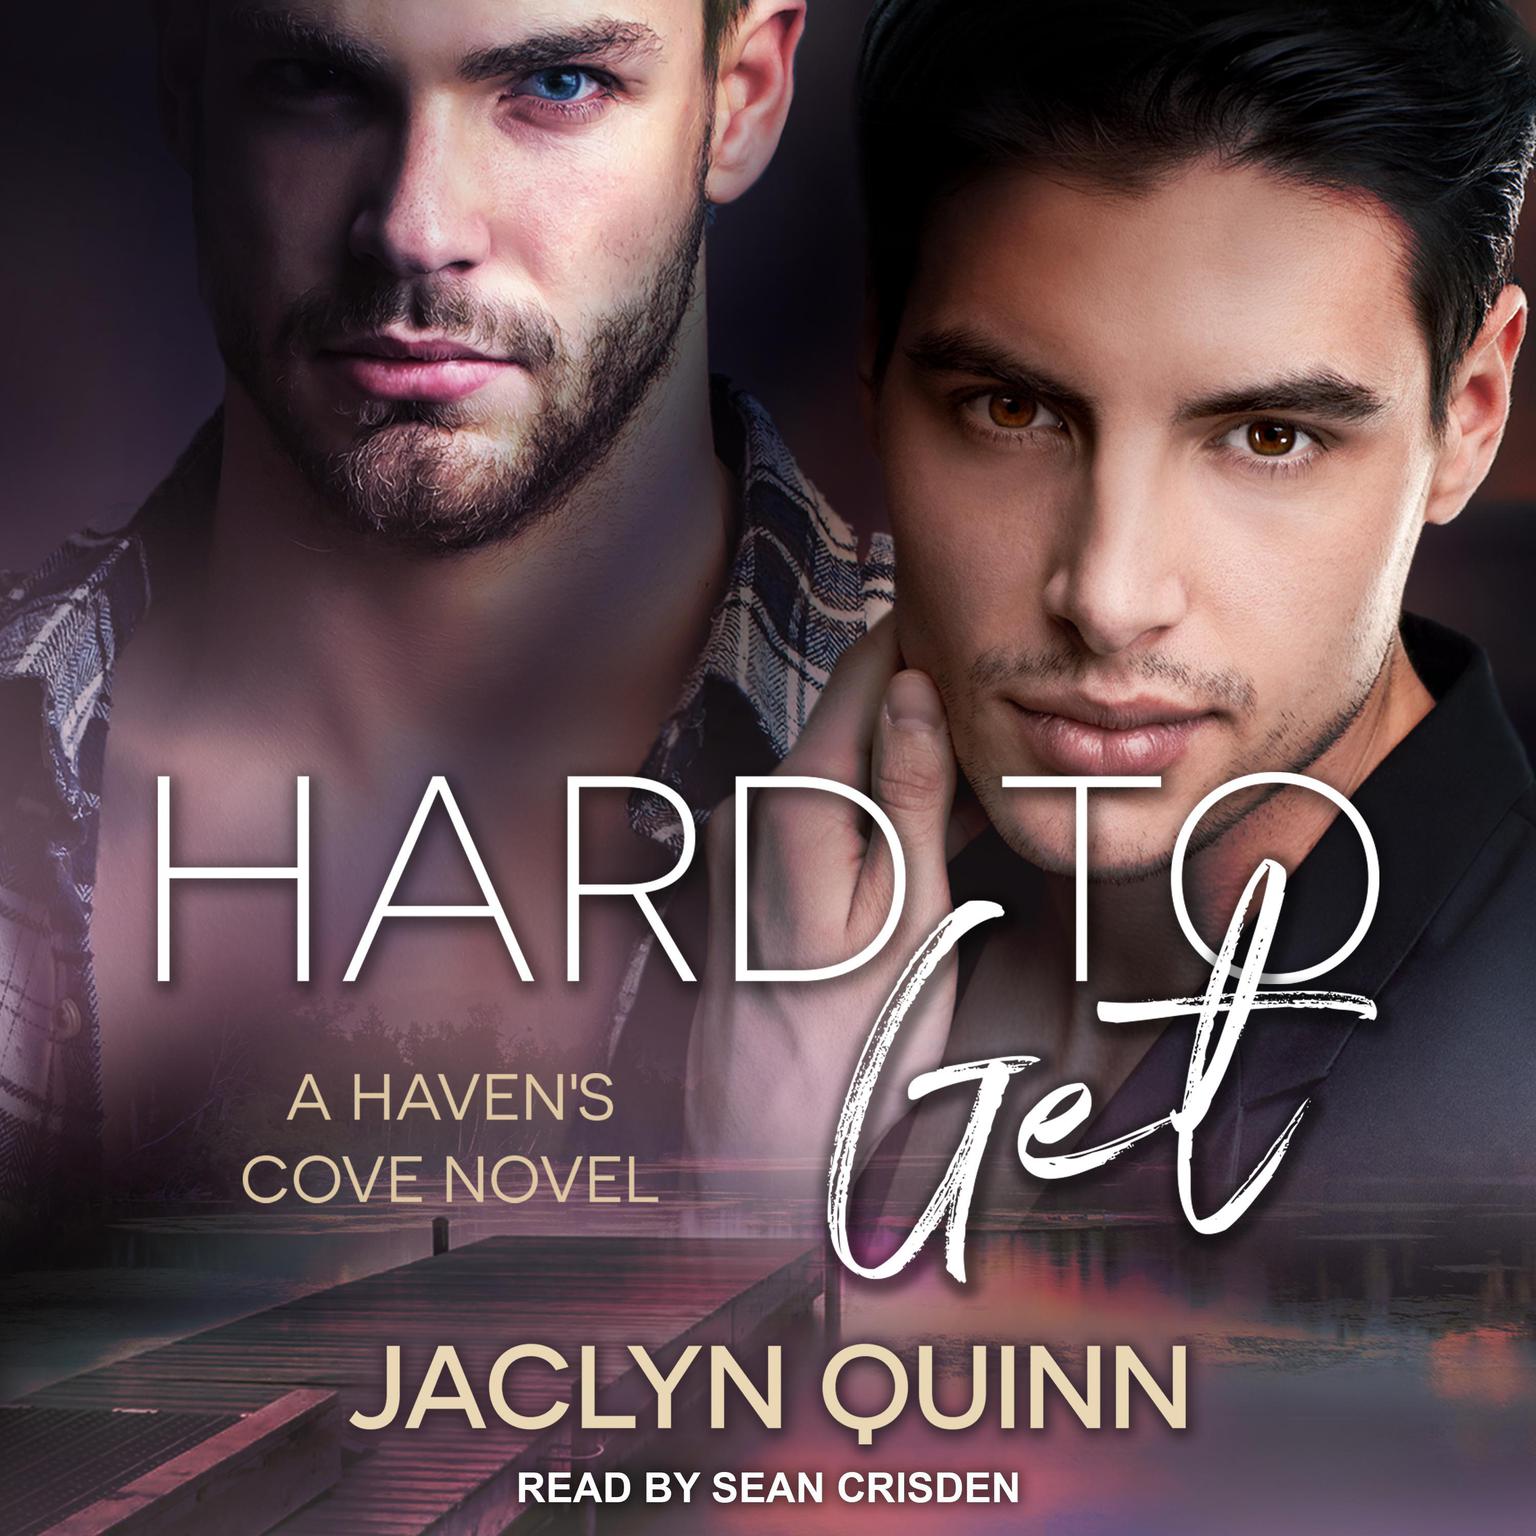 Hard to Get: A Havens Cove Novel Audiobook, by Jaclyn Quinn